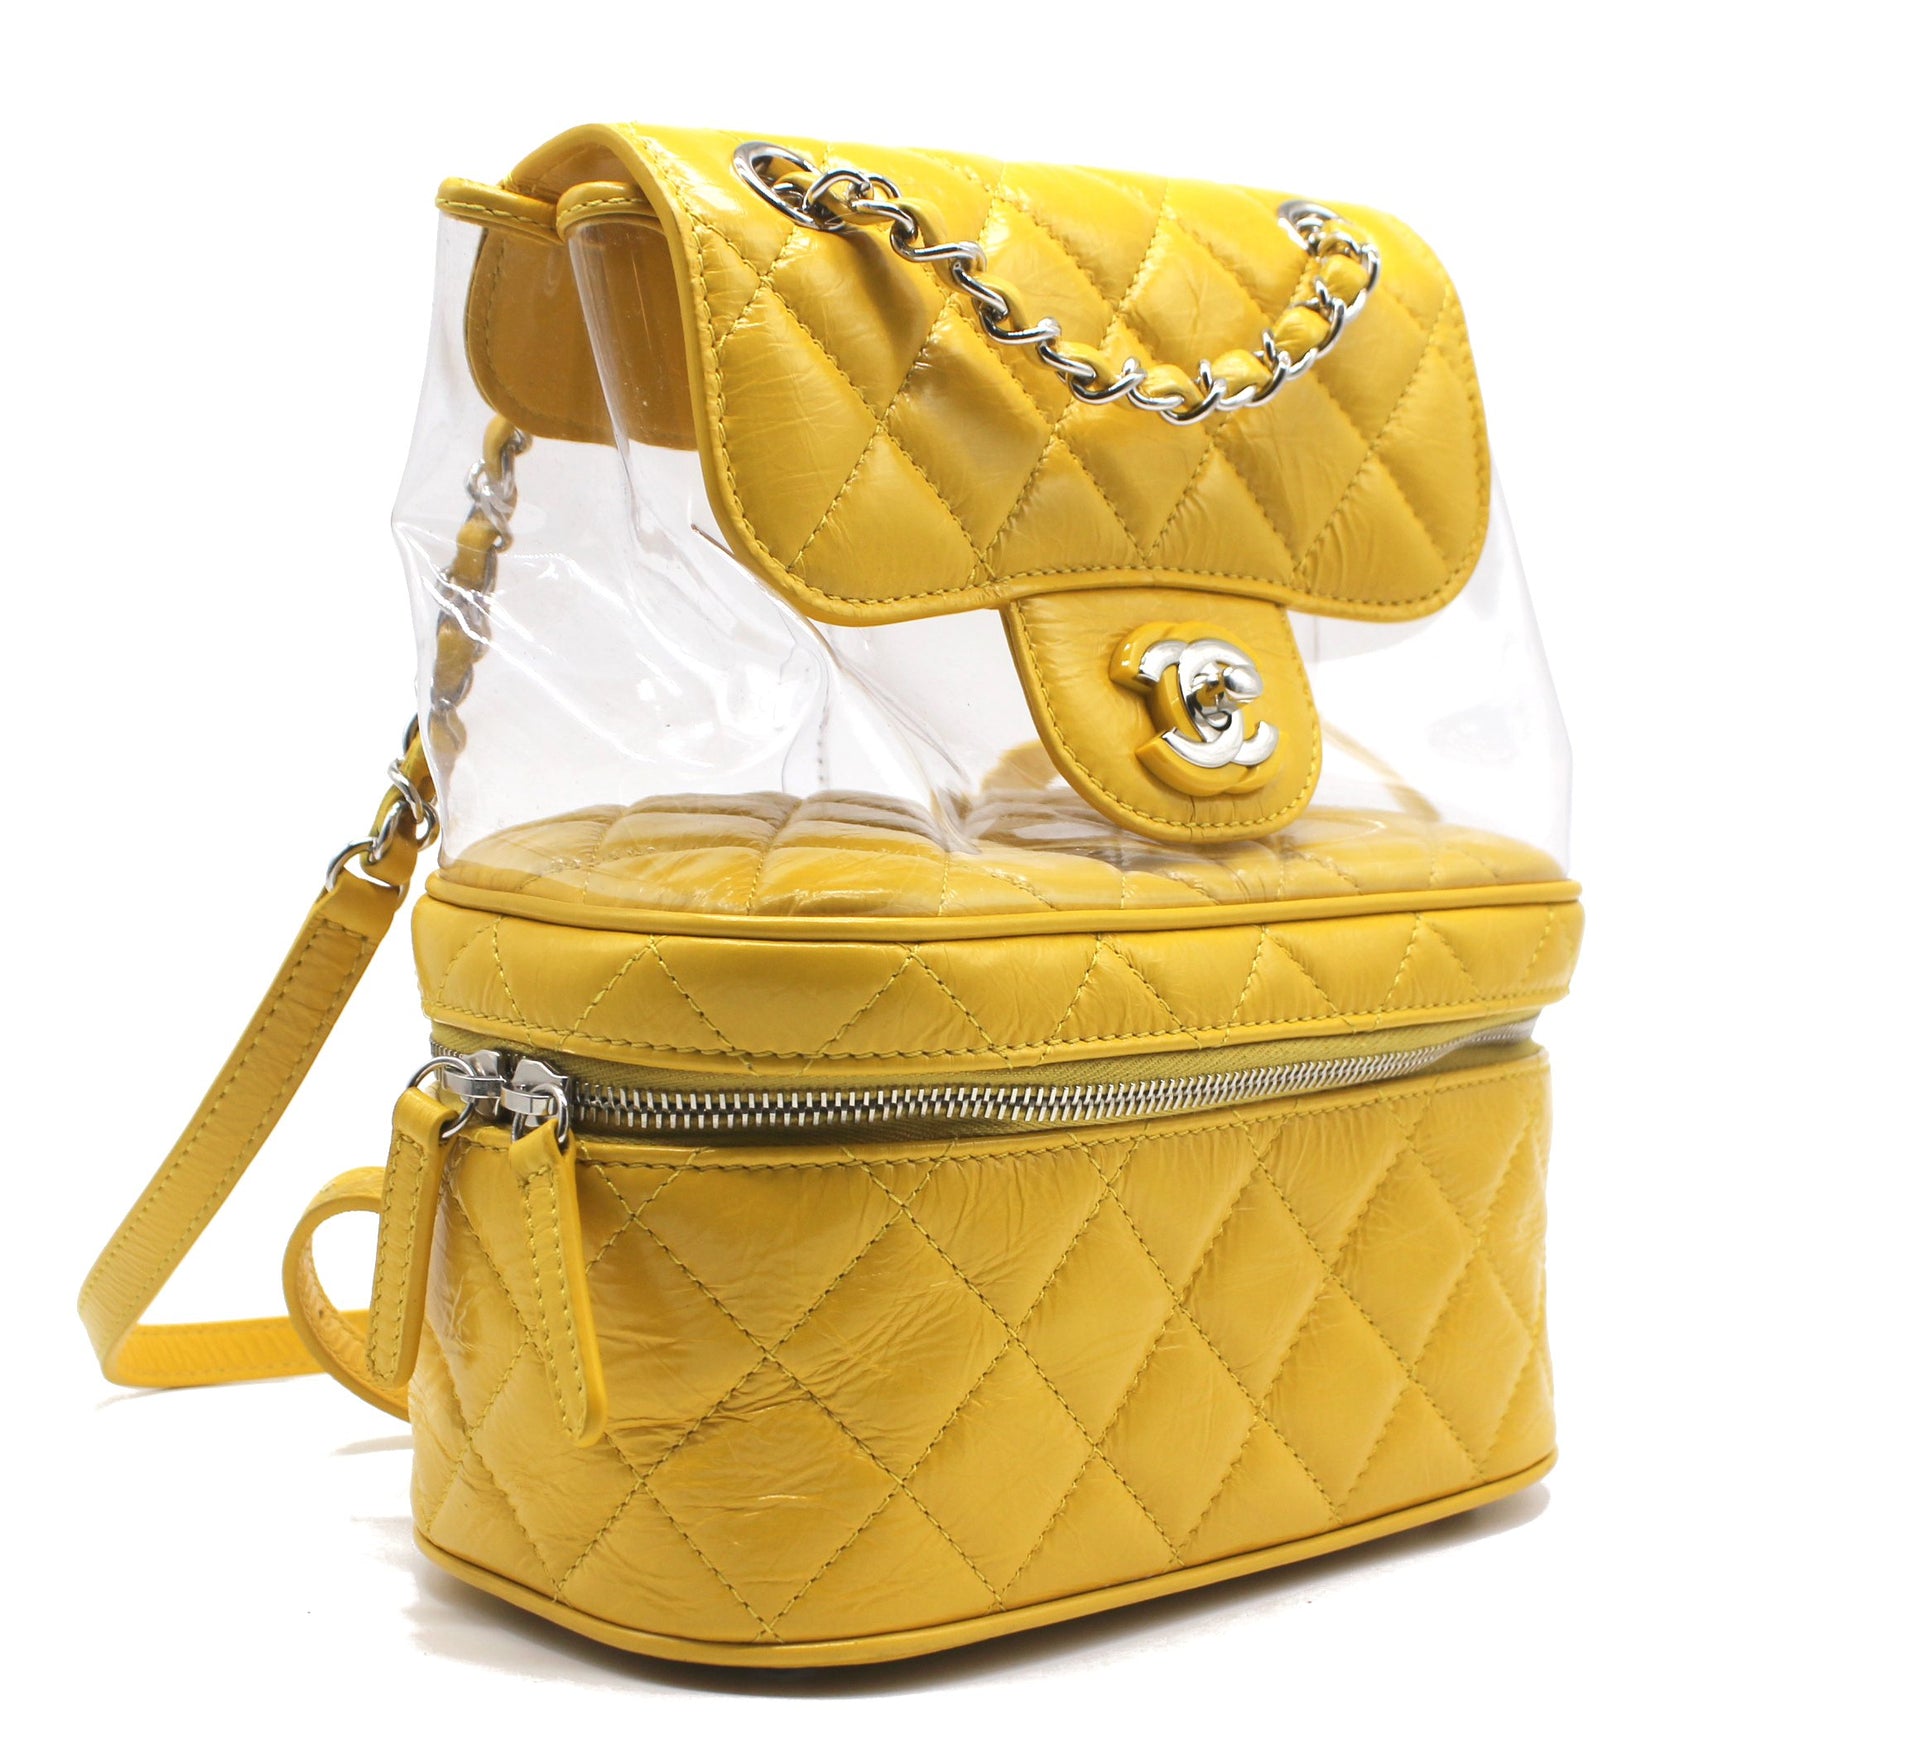 Chanel Classic Flap Crumpled Vanity and Resin Yellow Leather Pvc